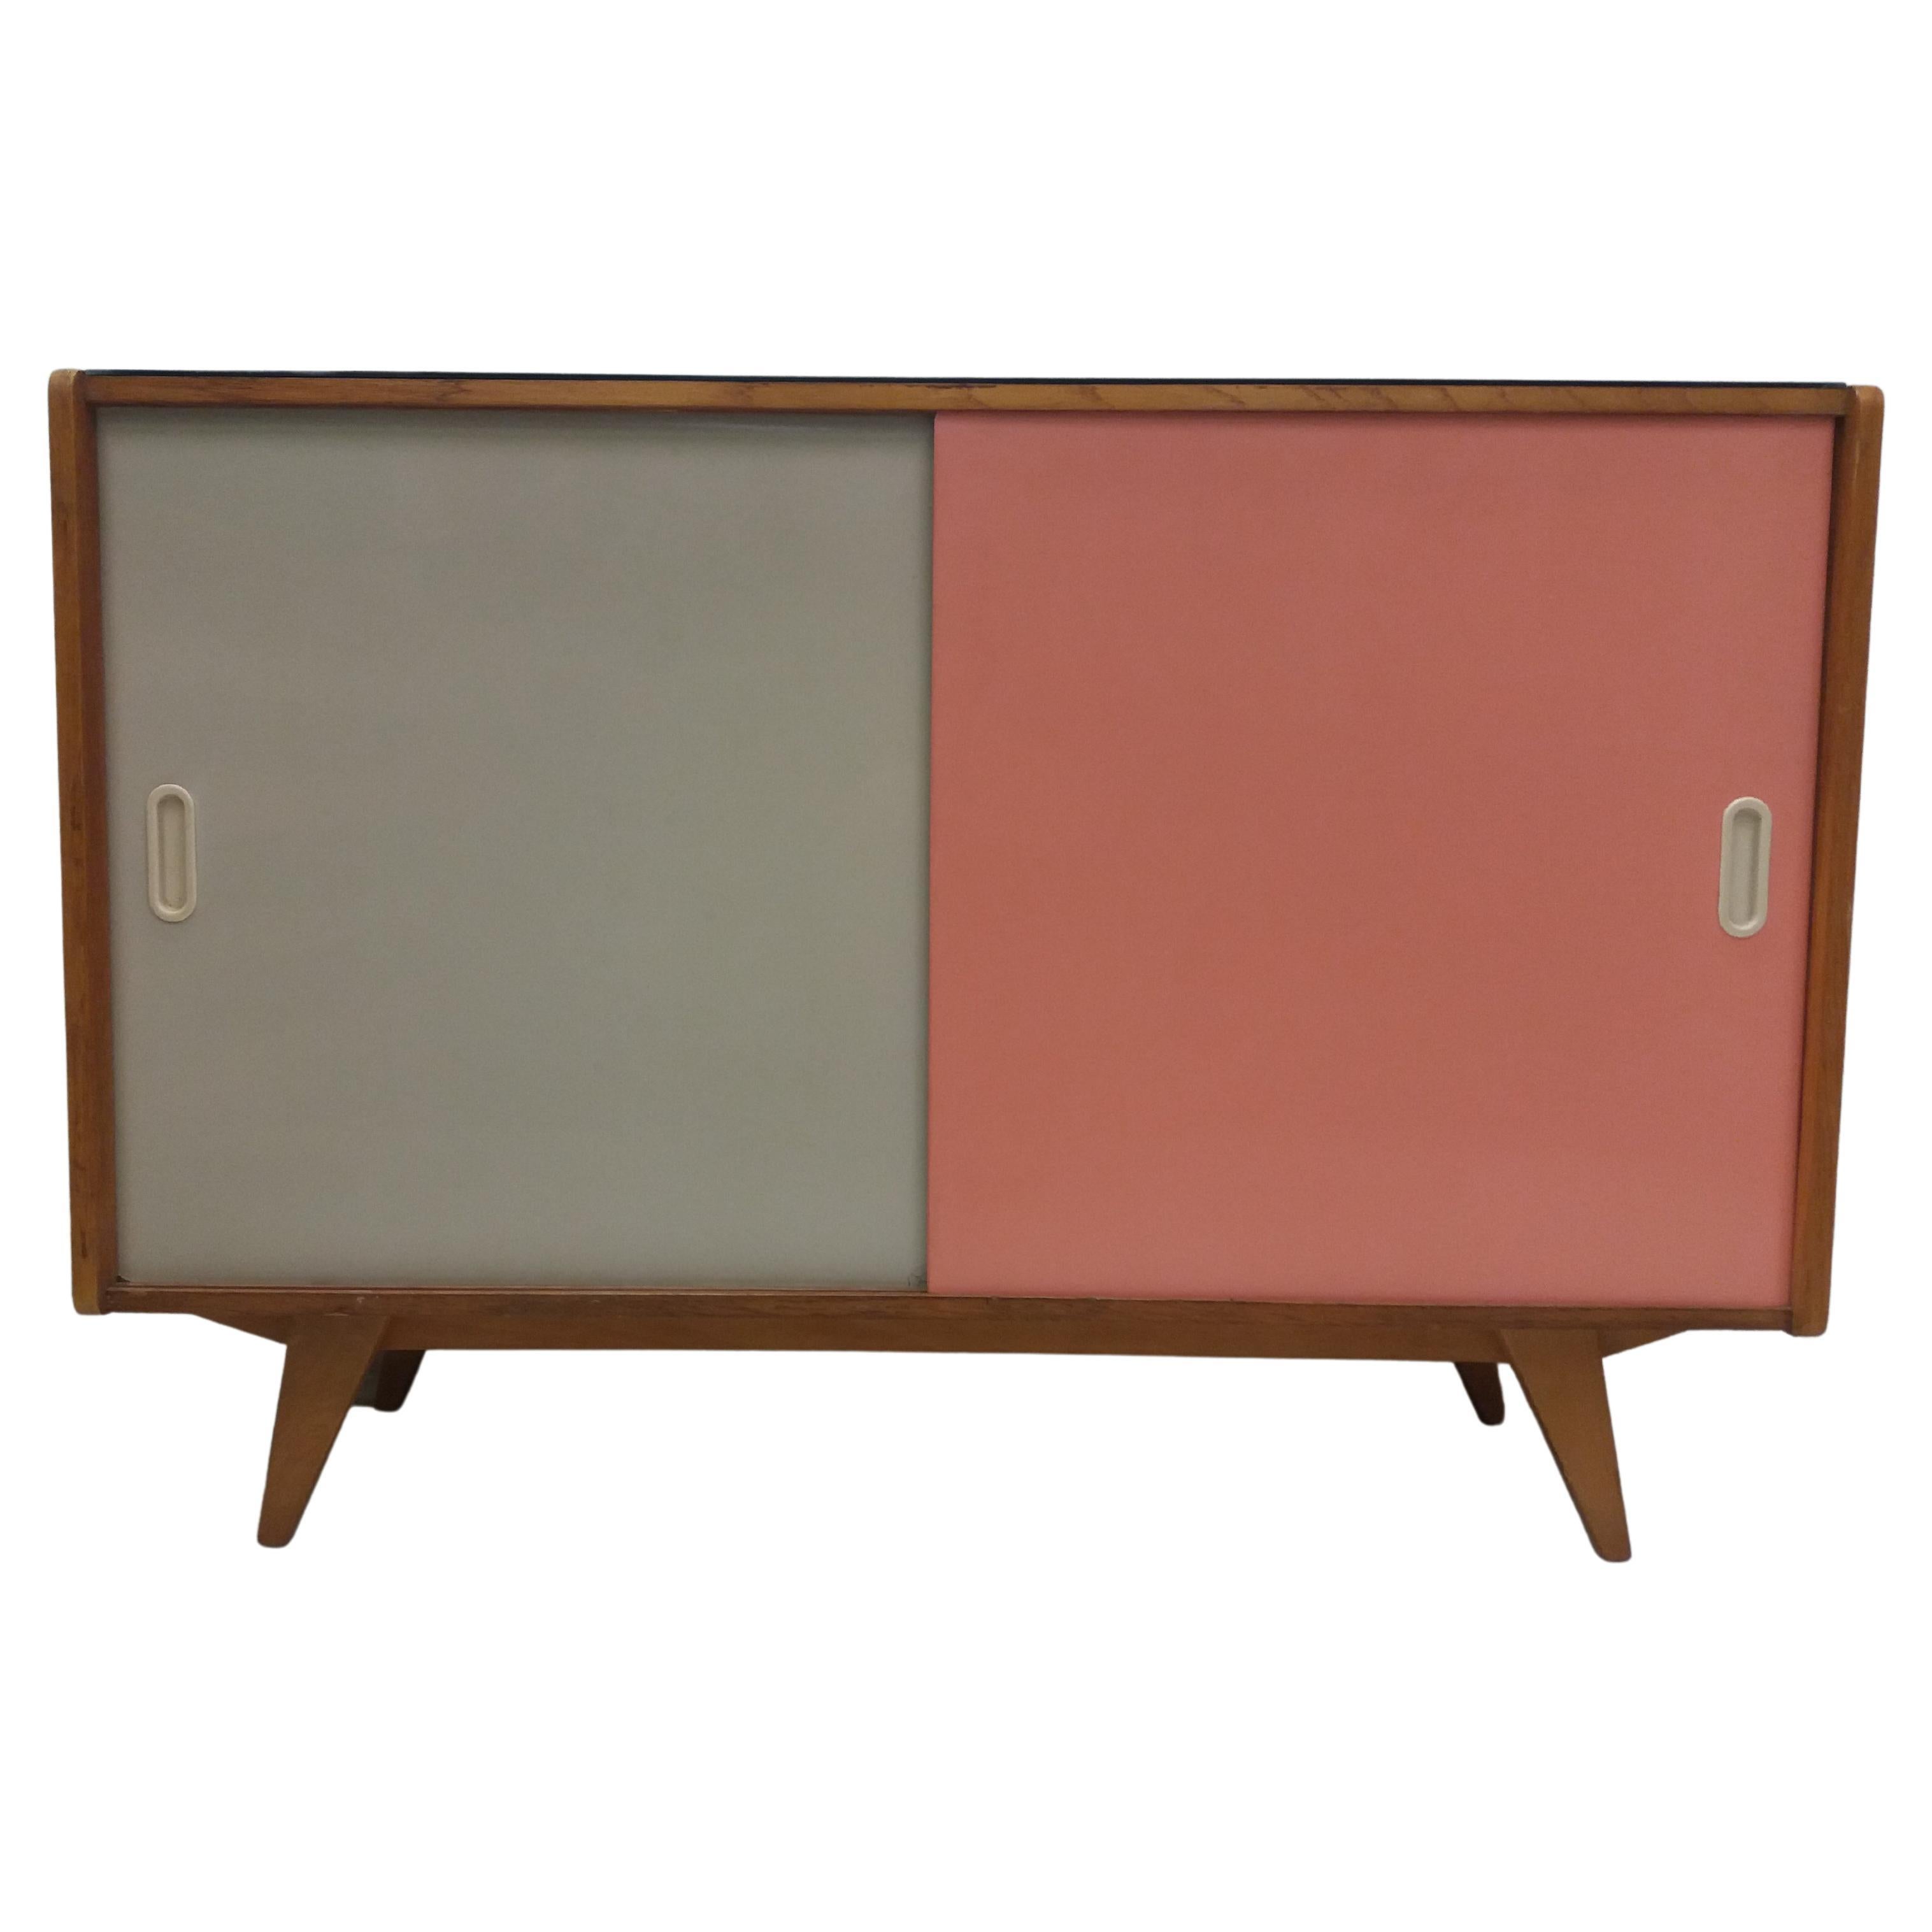 1960 Chest of Drawers by Jiroutek, Czechoslovakia